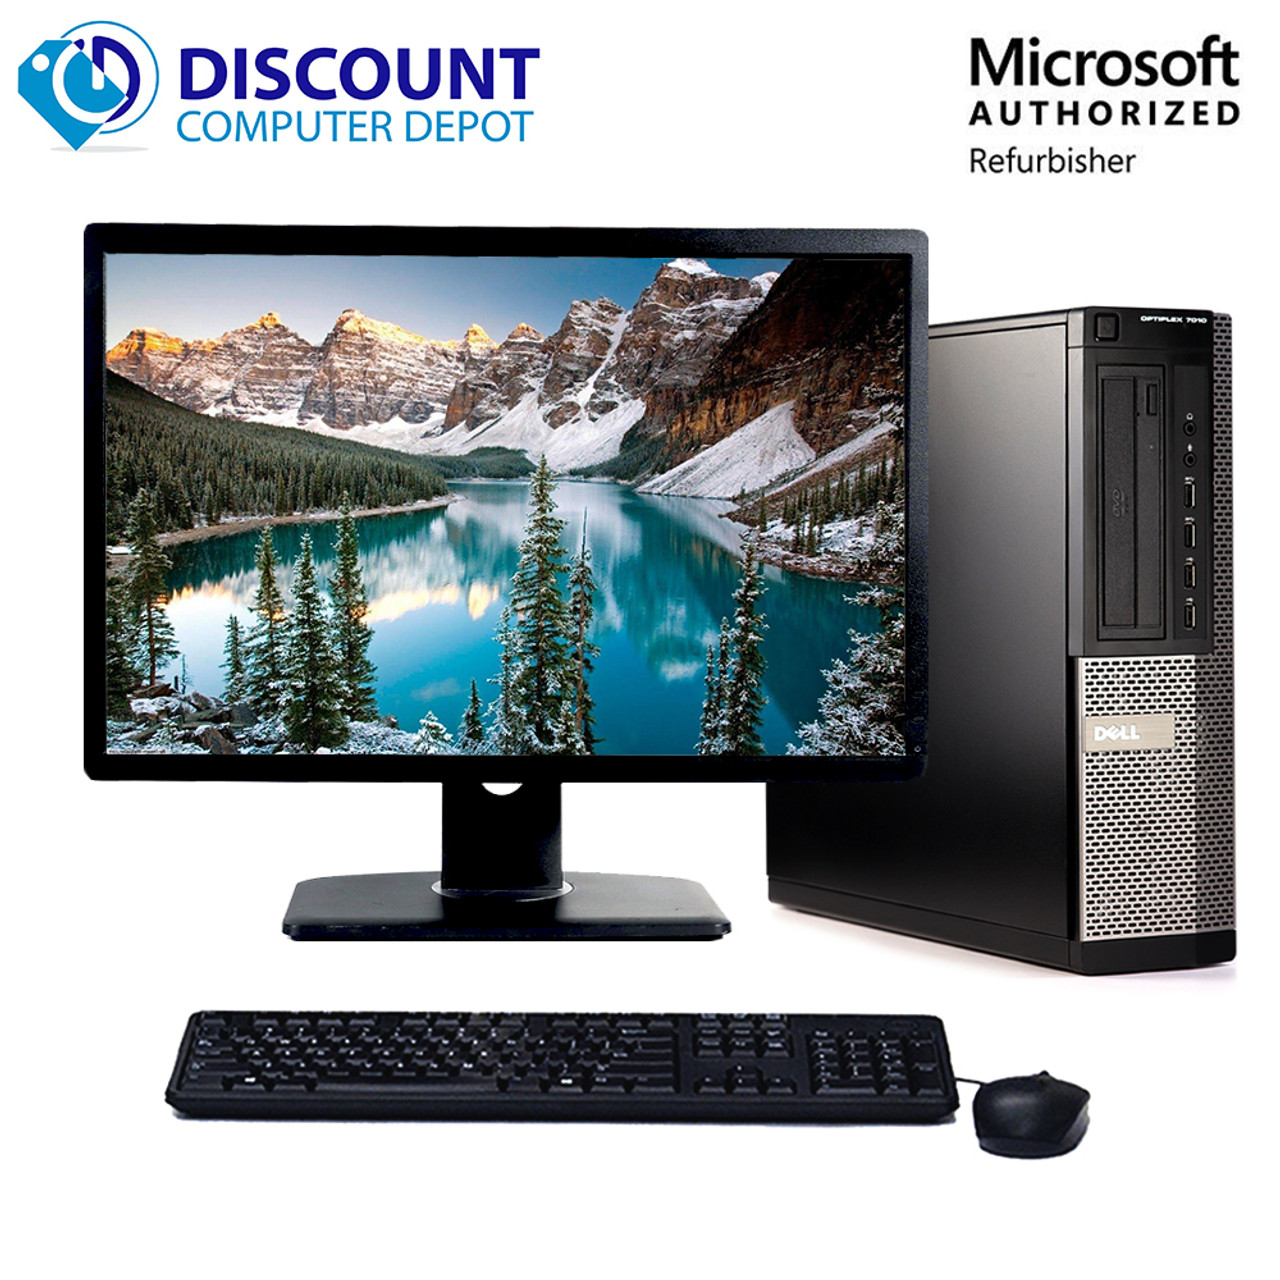 Dell Desktop Computer PC Intel Core i5- 3470 (3.2GHz) 8GB 500GB HDD Windows  10 Home DVD WIFI / Keyboard and Mouse / Custom Build